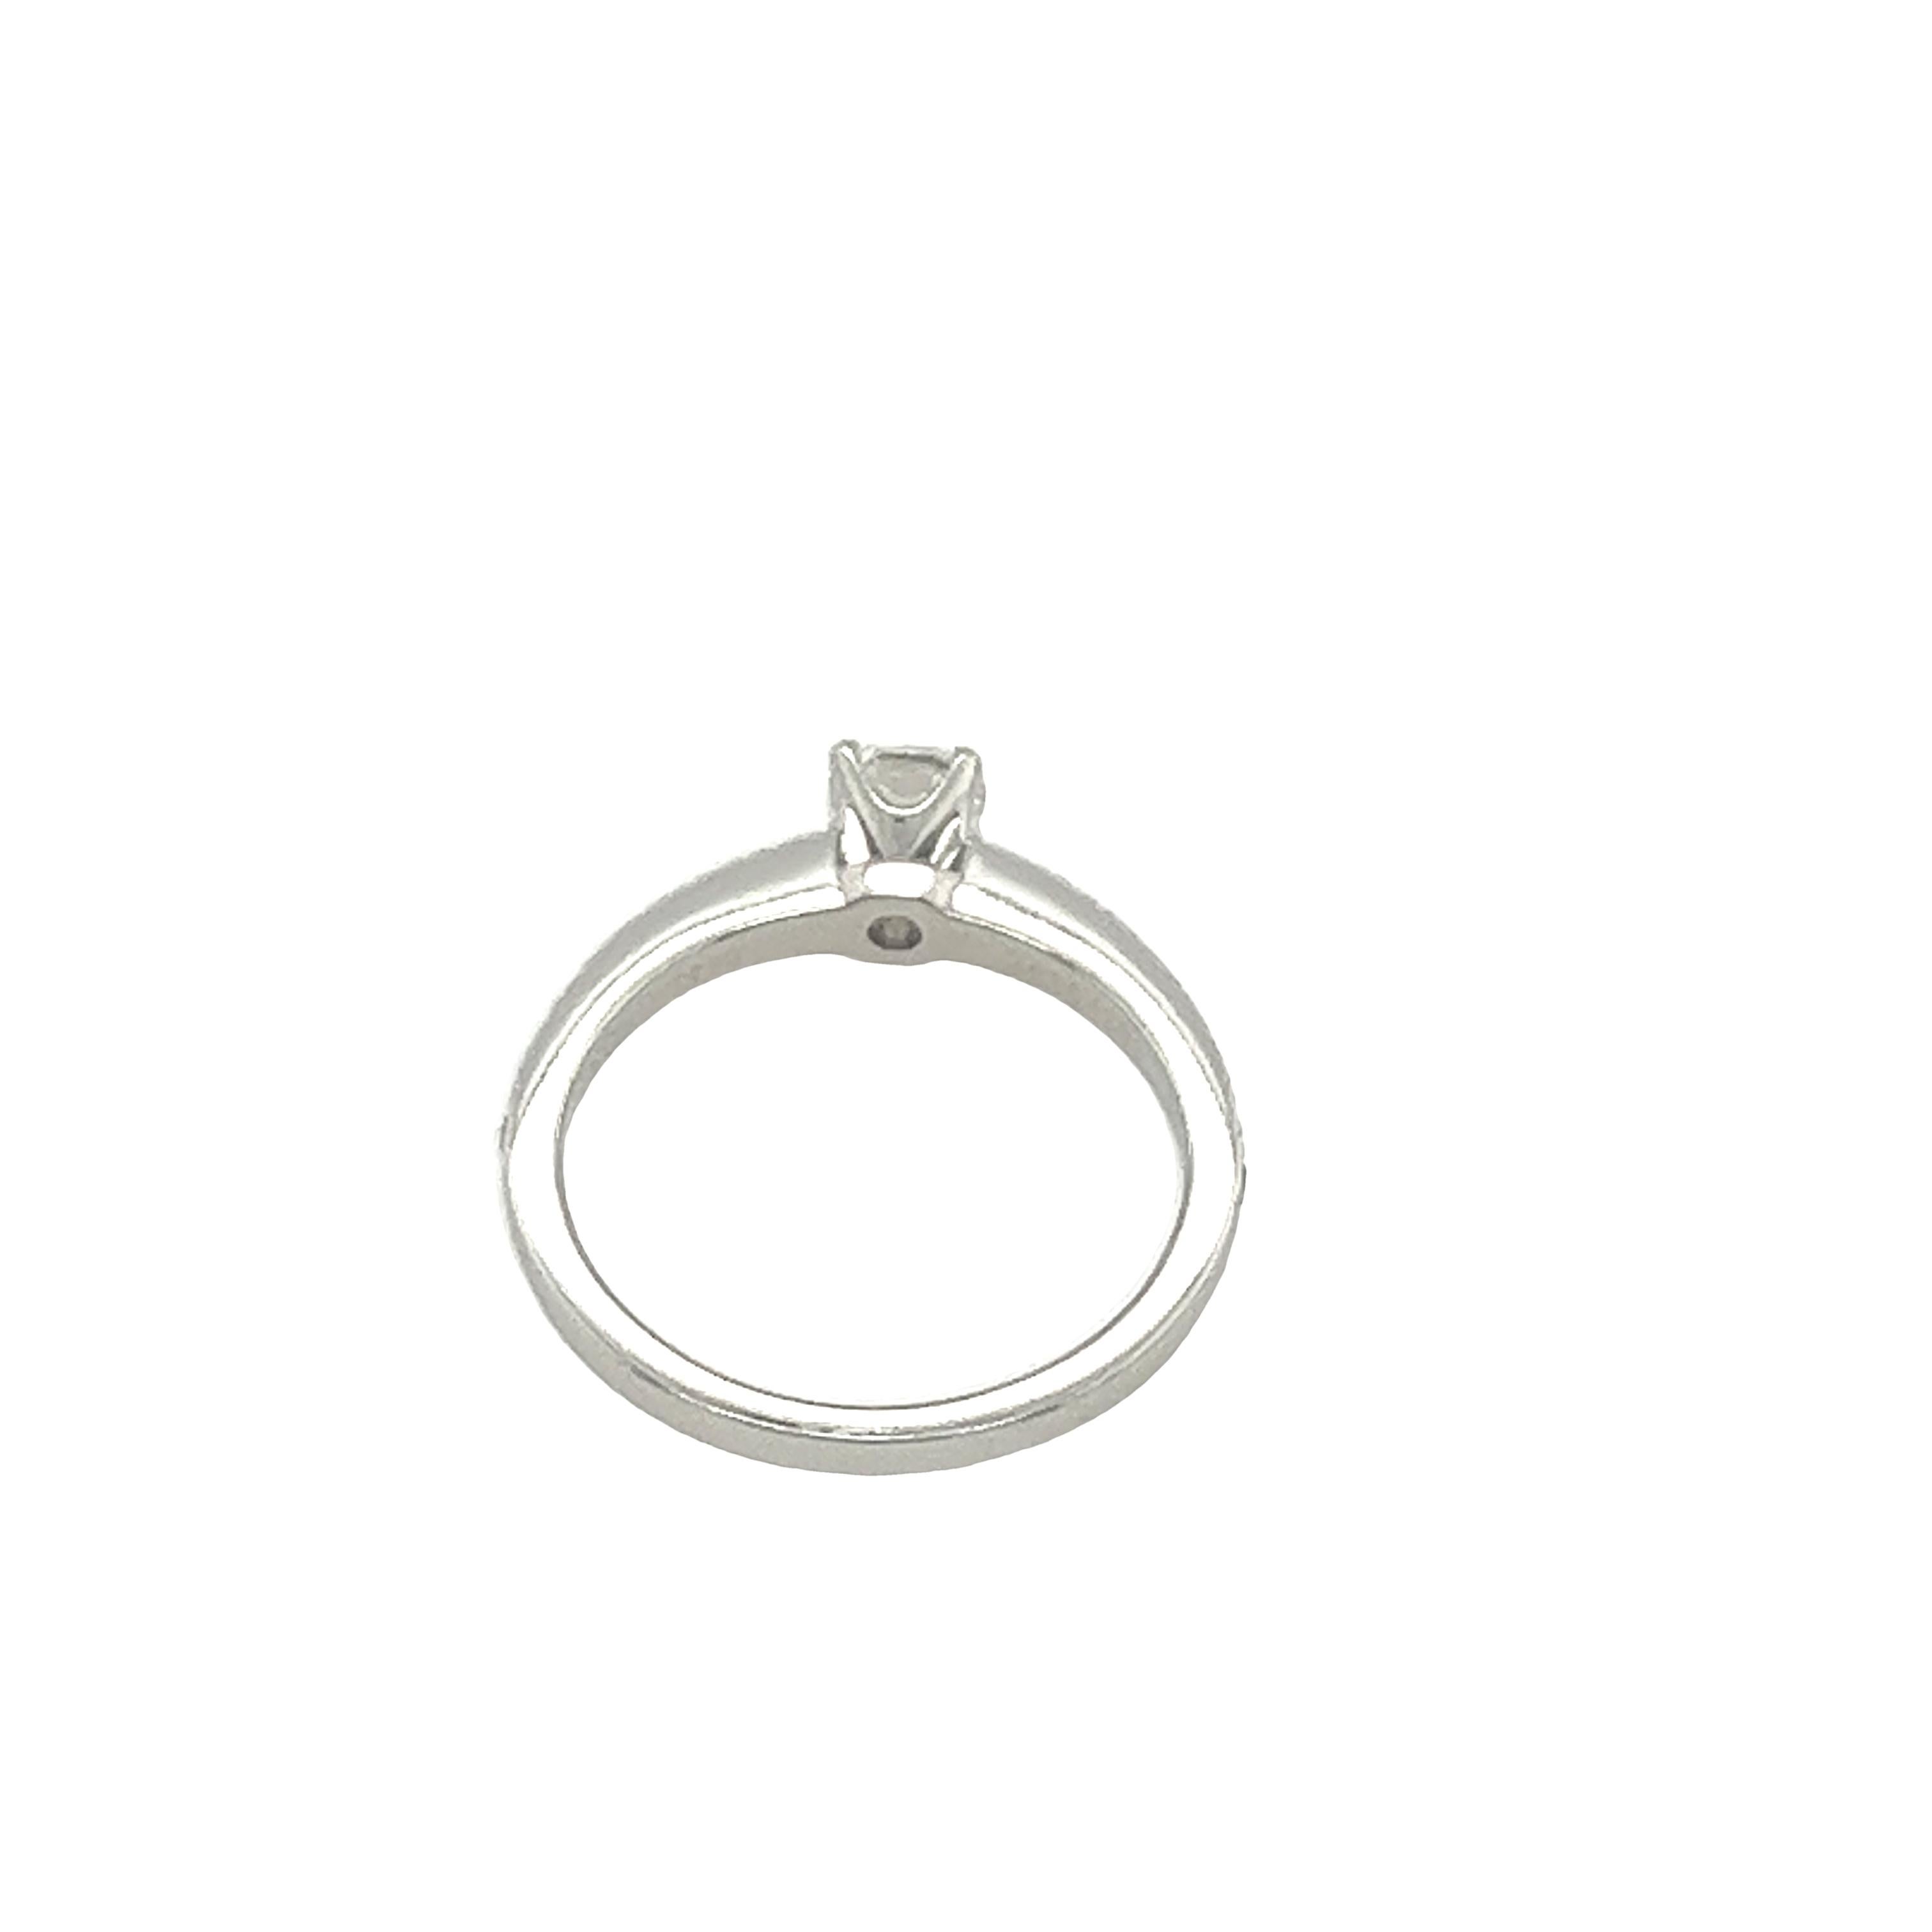 Tiffany & Co 0.33ct Square Cushion Diamond Engagement Ring set in Platinum  For Sale 3